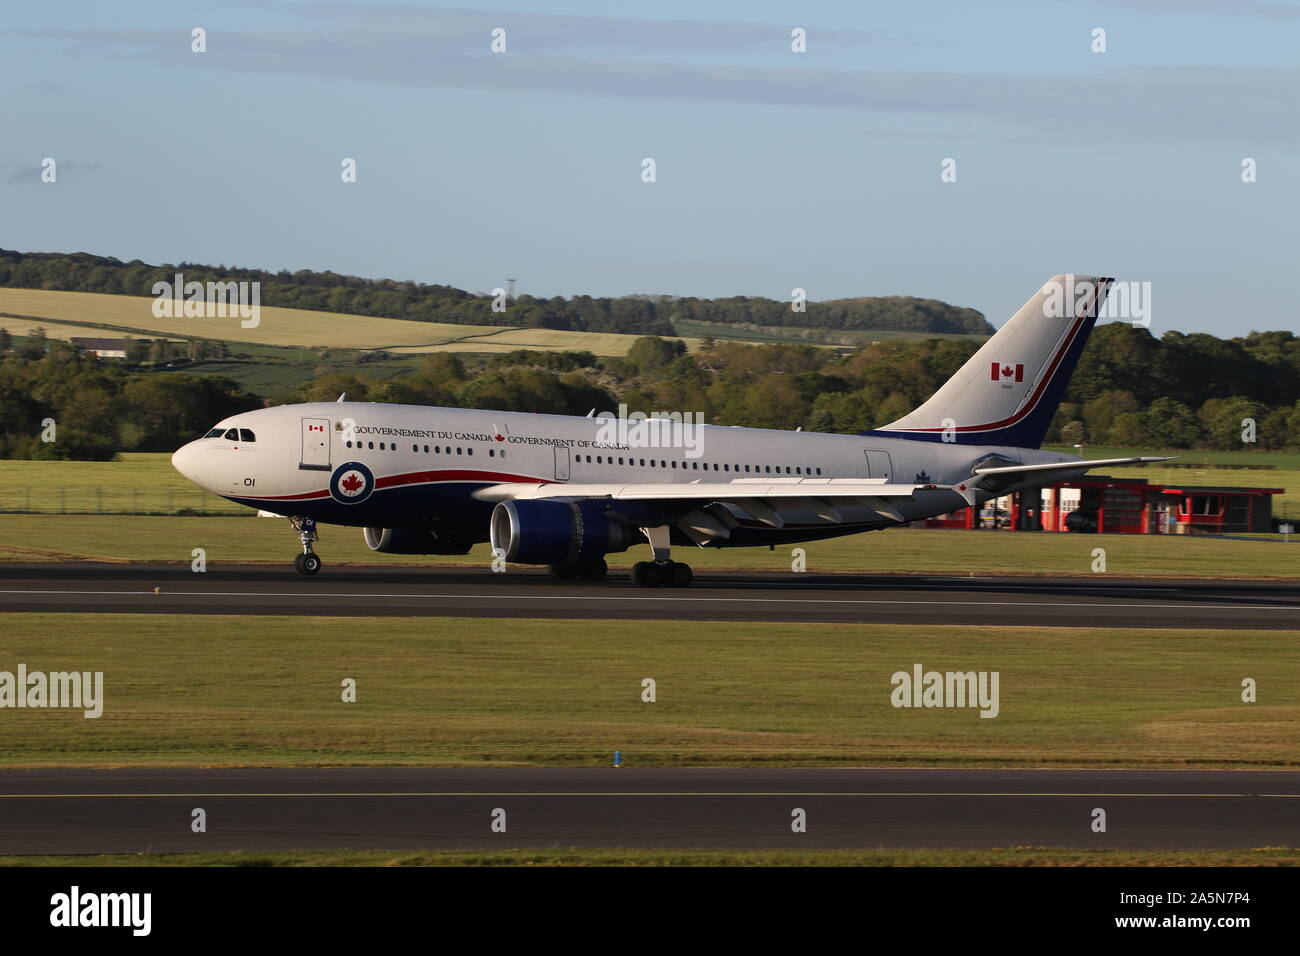 15001, an Airbus CC-150 Polaris operated by the Royal Canadian Air Force, at Prestwick International Airport in Ayrshire. Stock Photo